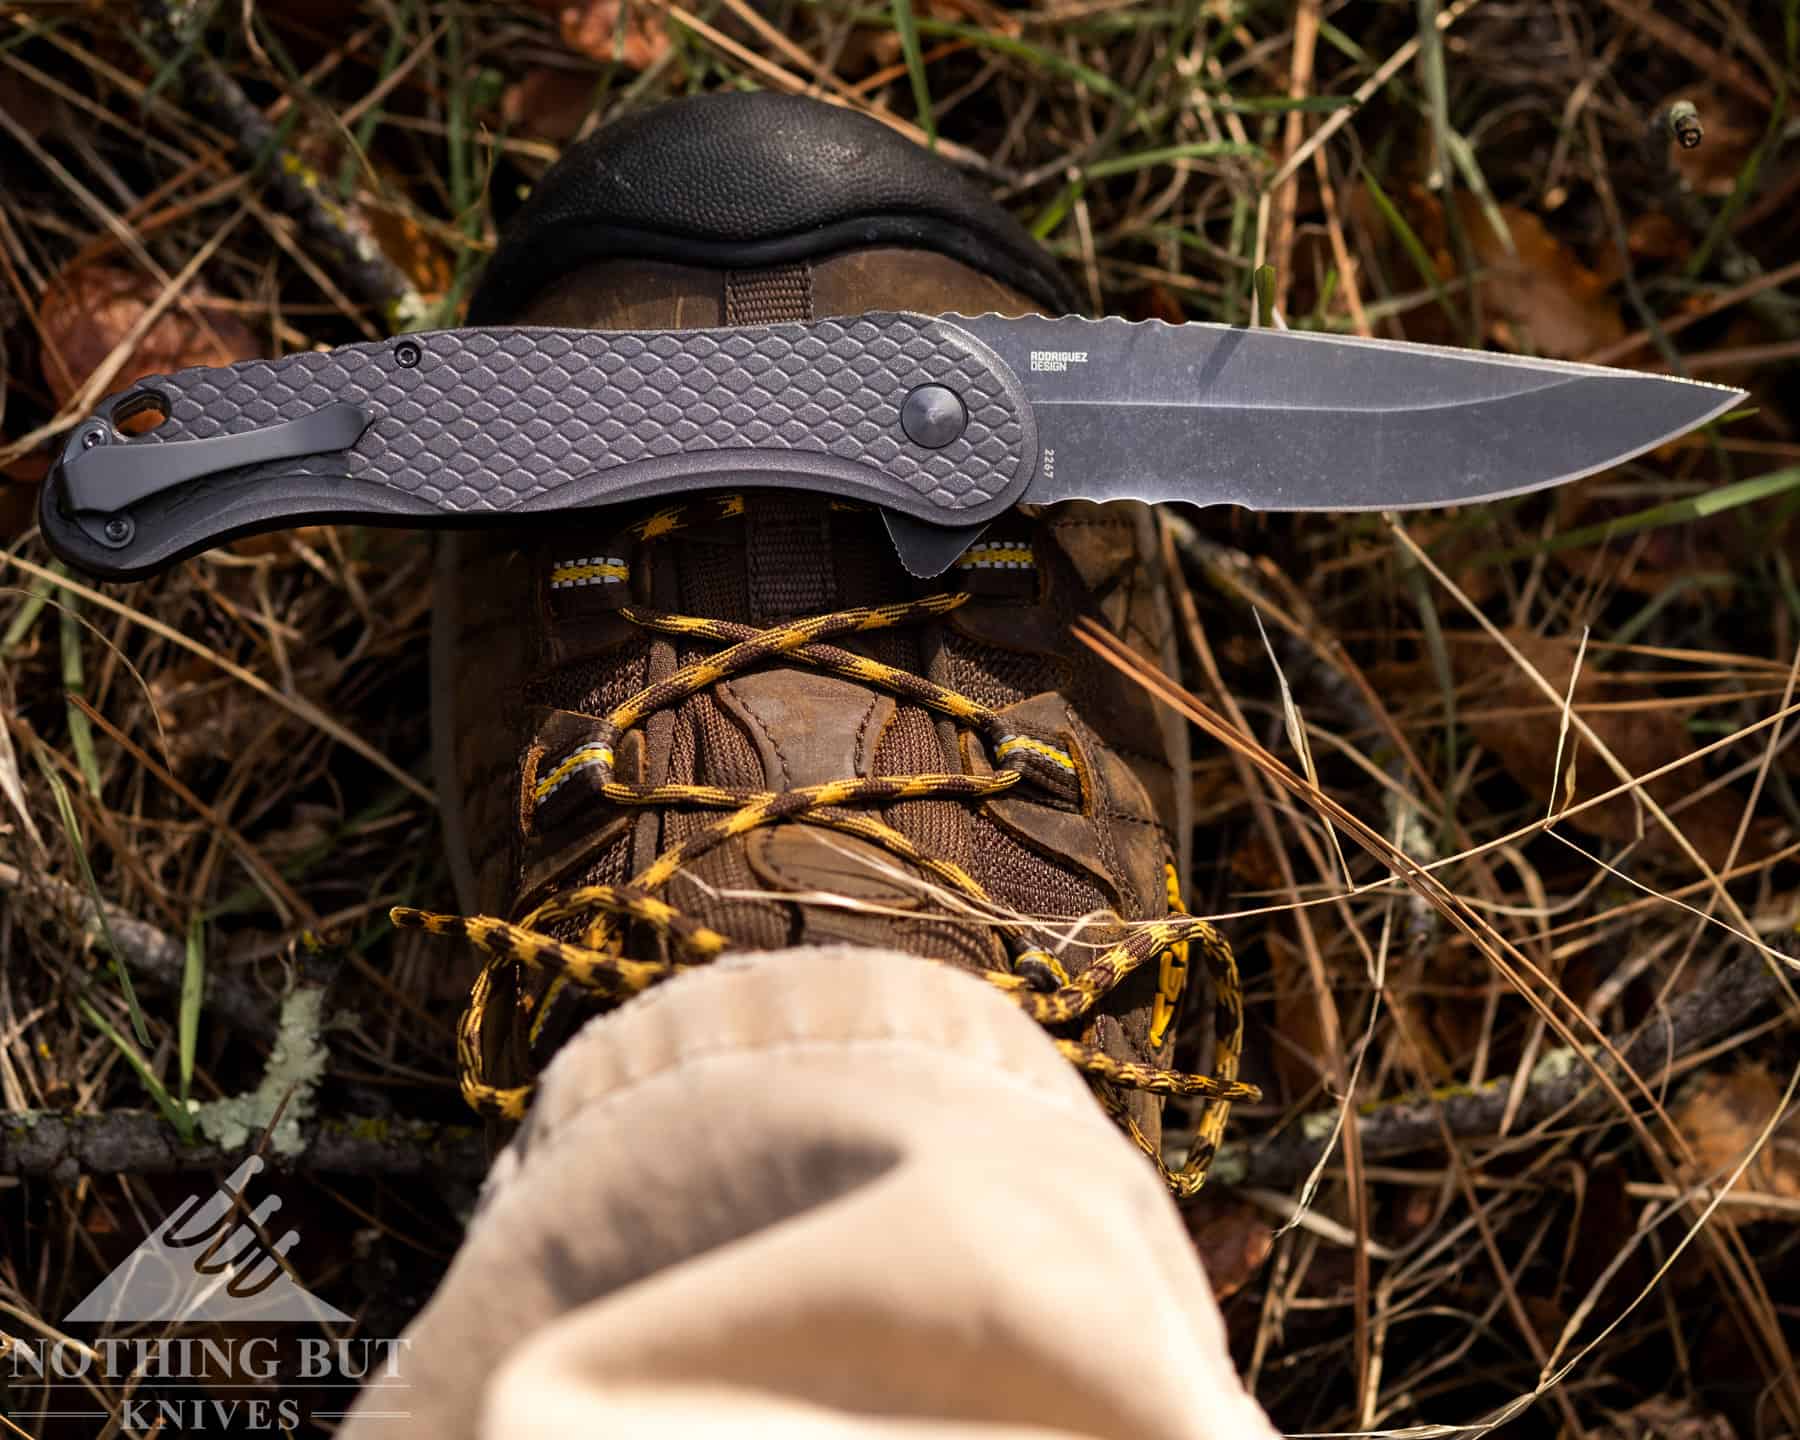 The Taco Viper is a fairly long pocket knife, but it is thin enough that it does not take up too much room in the pocket. 